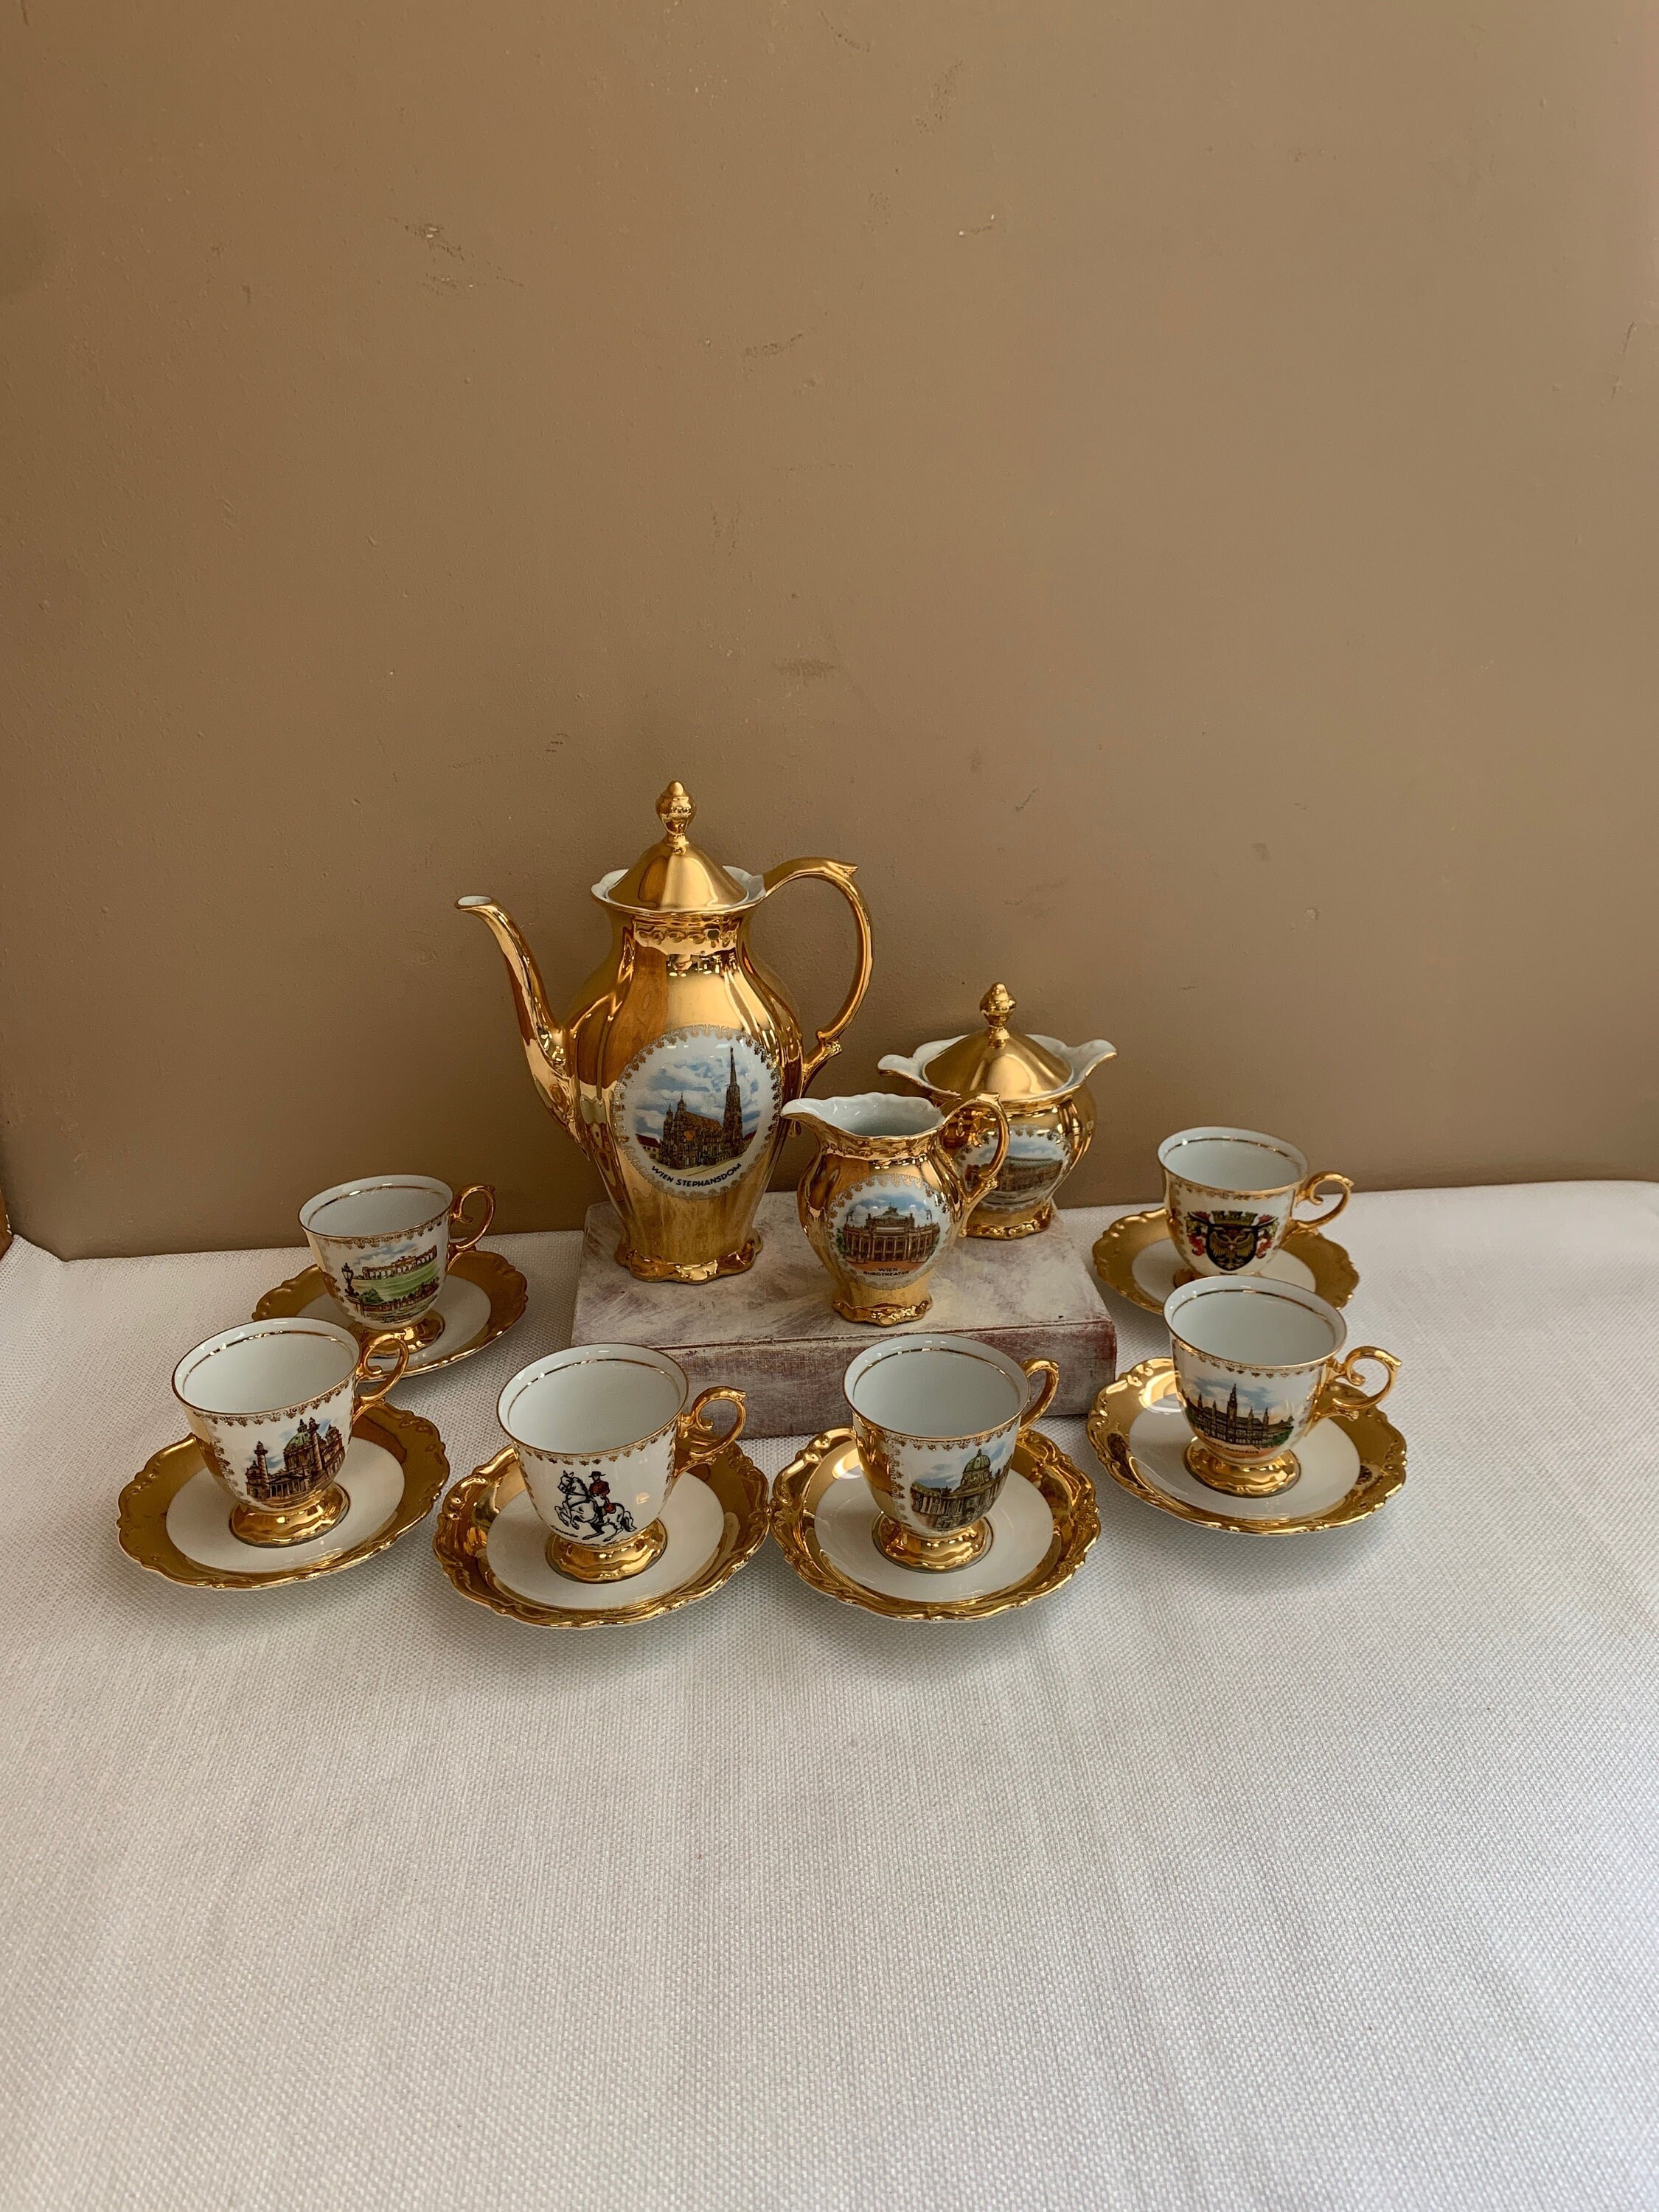 With for Vienna 6, and Six Pictures Ceramic Gold With Etsy Cups Saucers, Tea Coffee Porcelain Demitasse - Set Vintage Bavarian or Wien